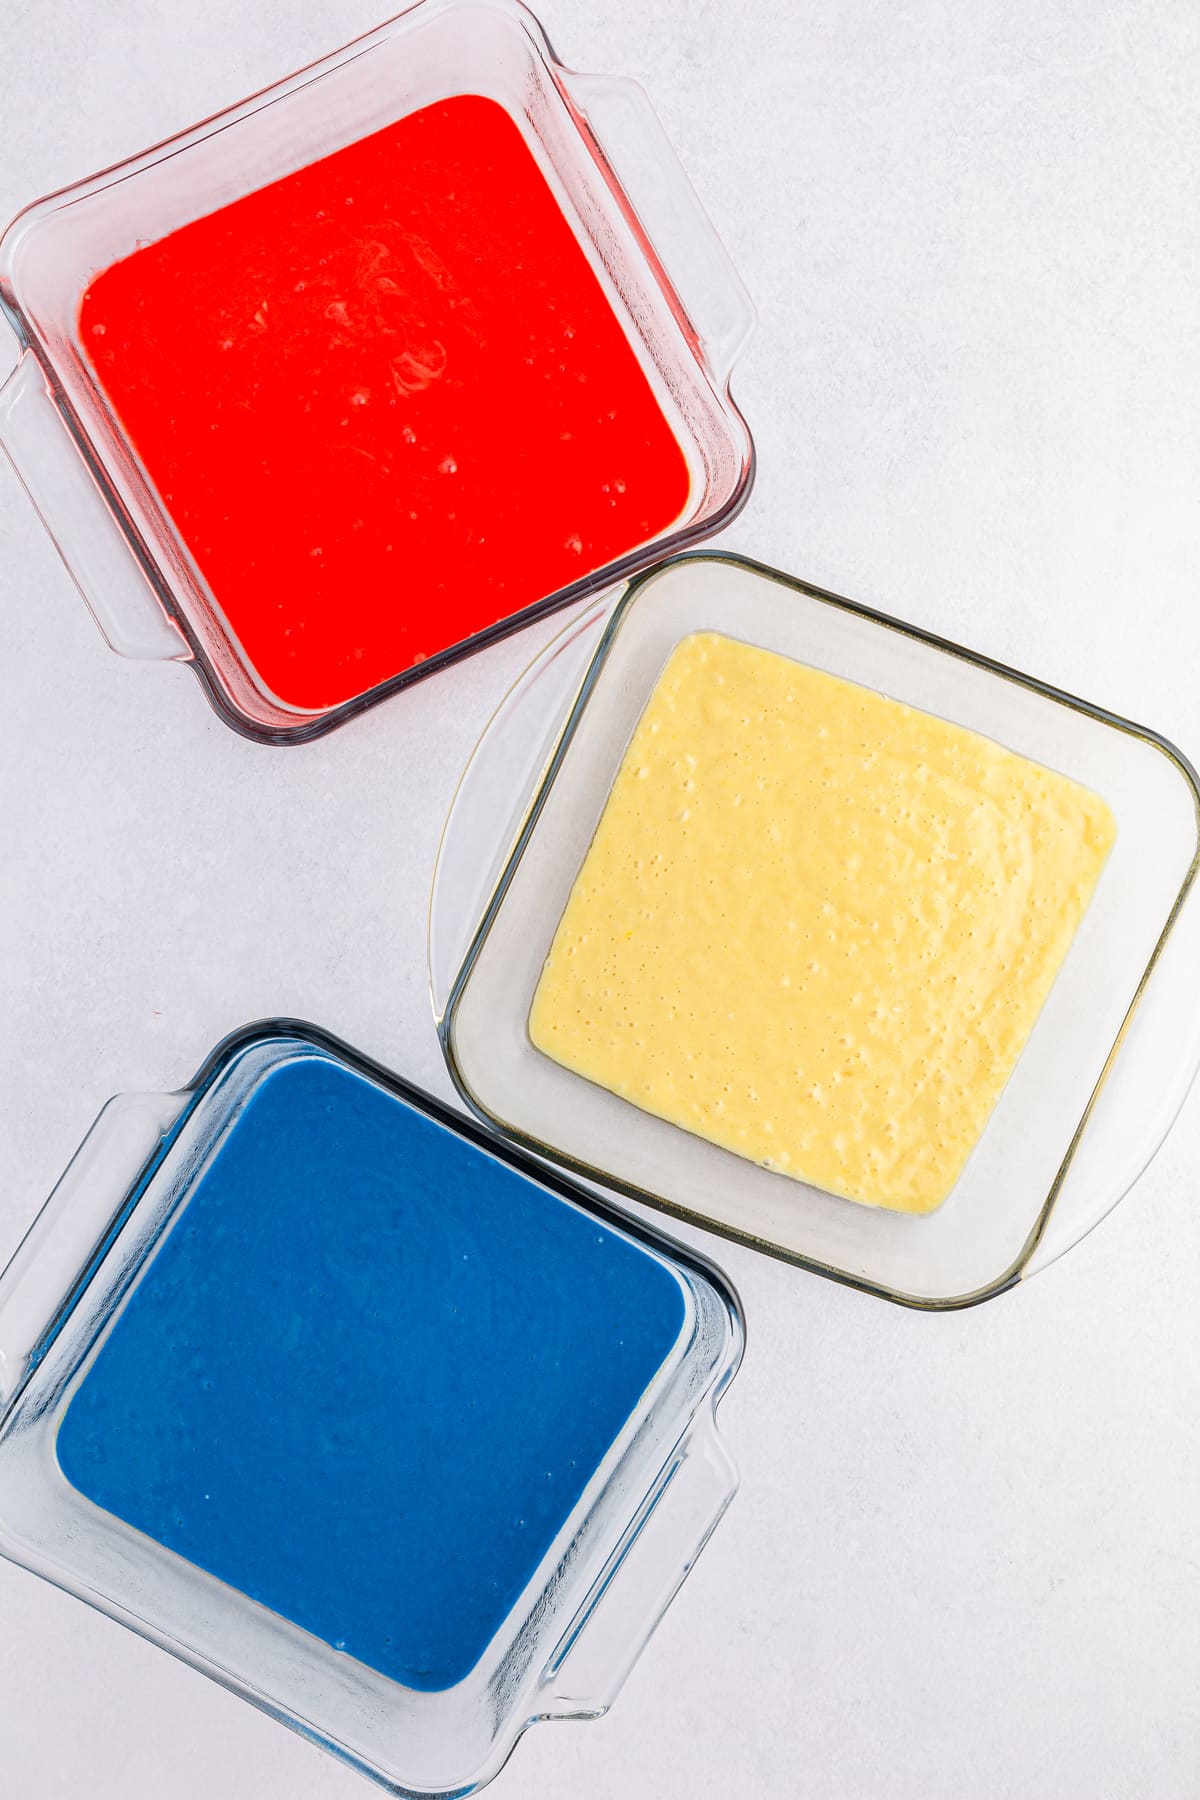 red while and blue cake mix in baking pans